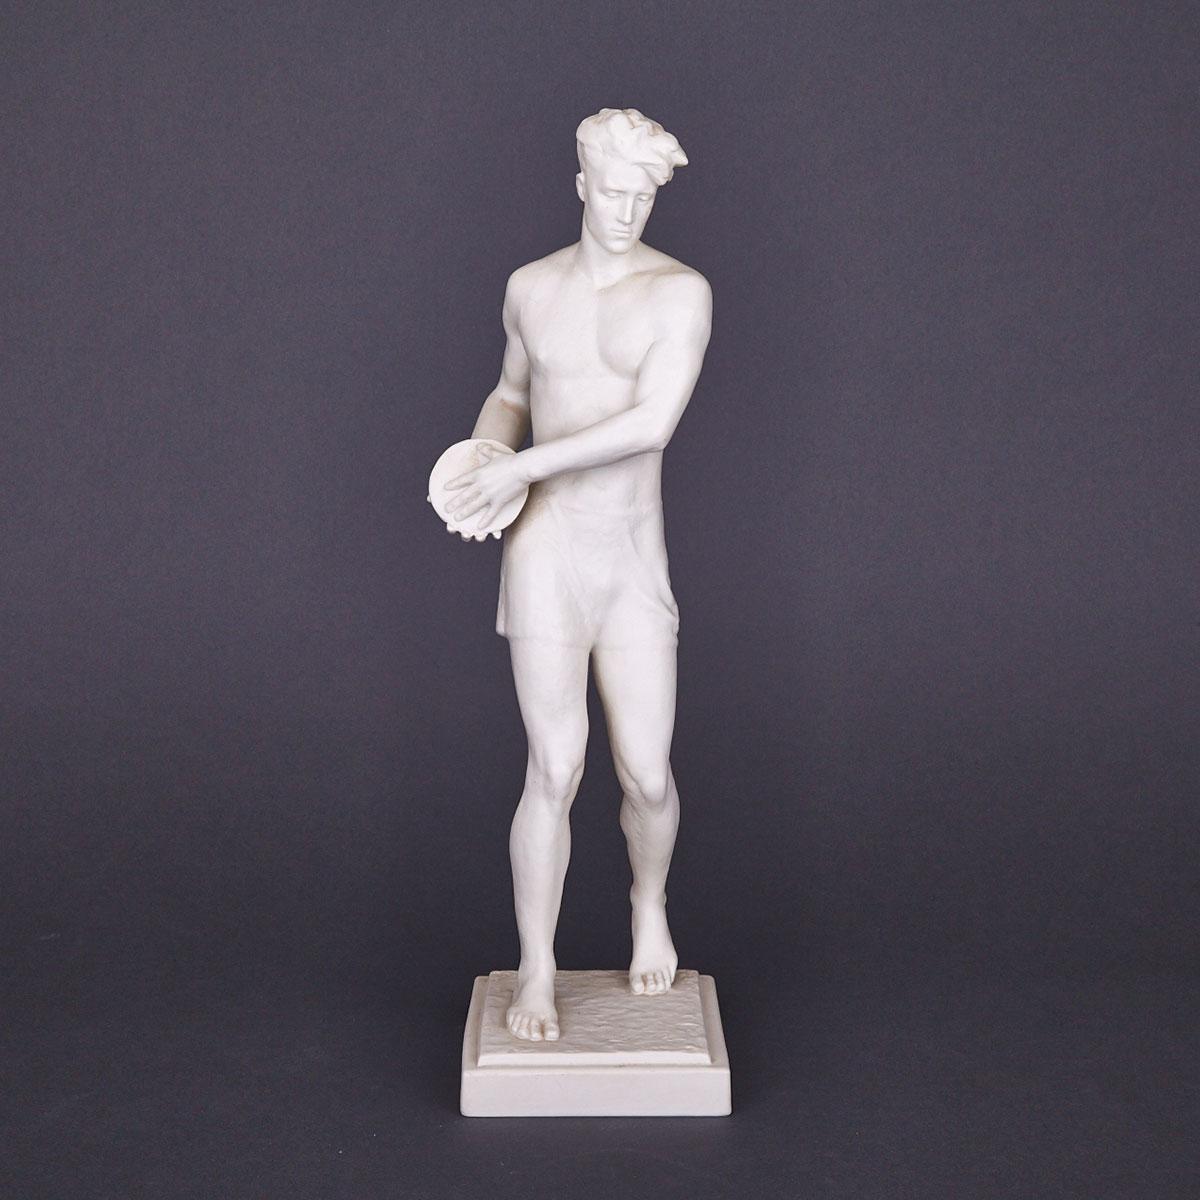 Rosenthal Figure of a Discus Thrower, Otto Obermaier, c.1939